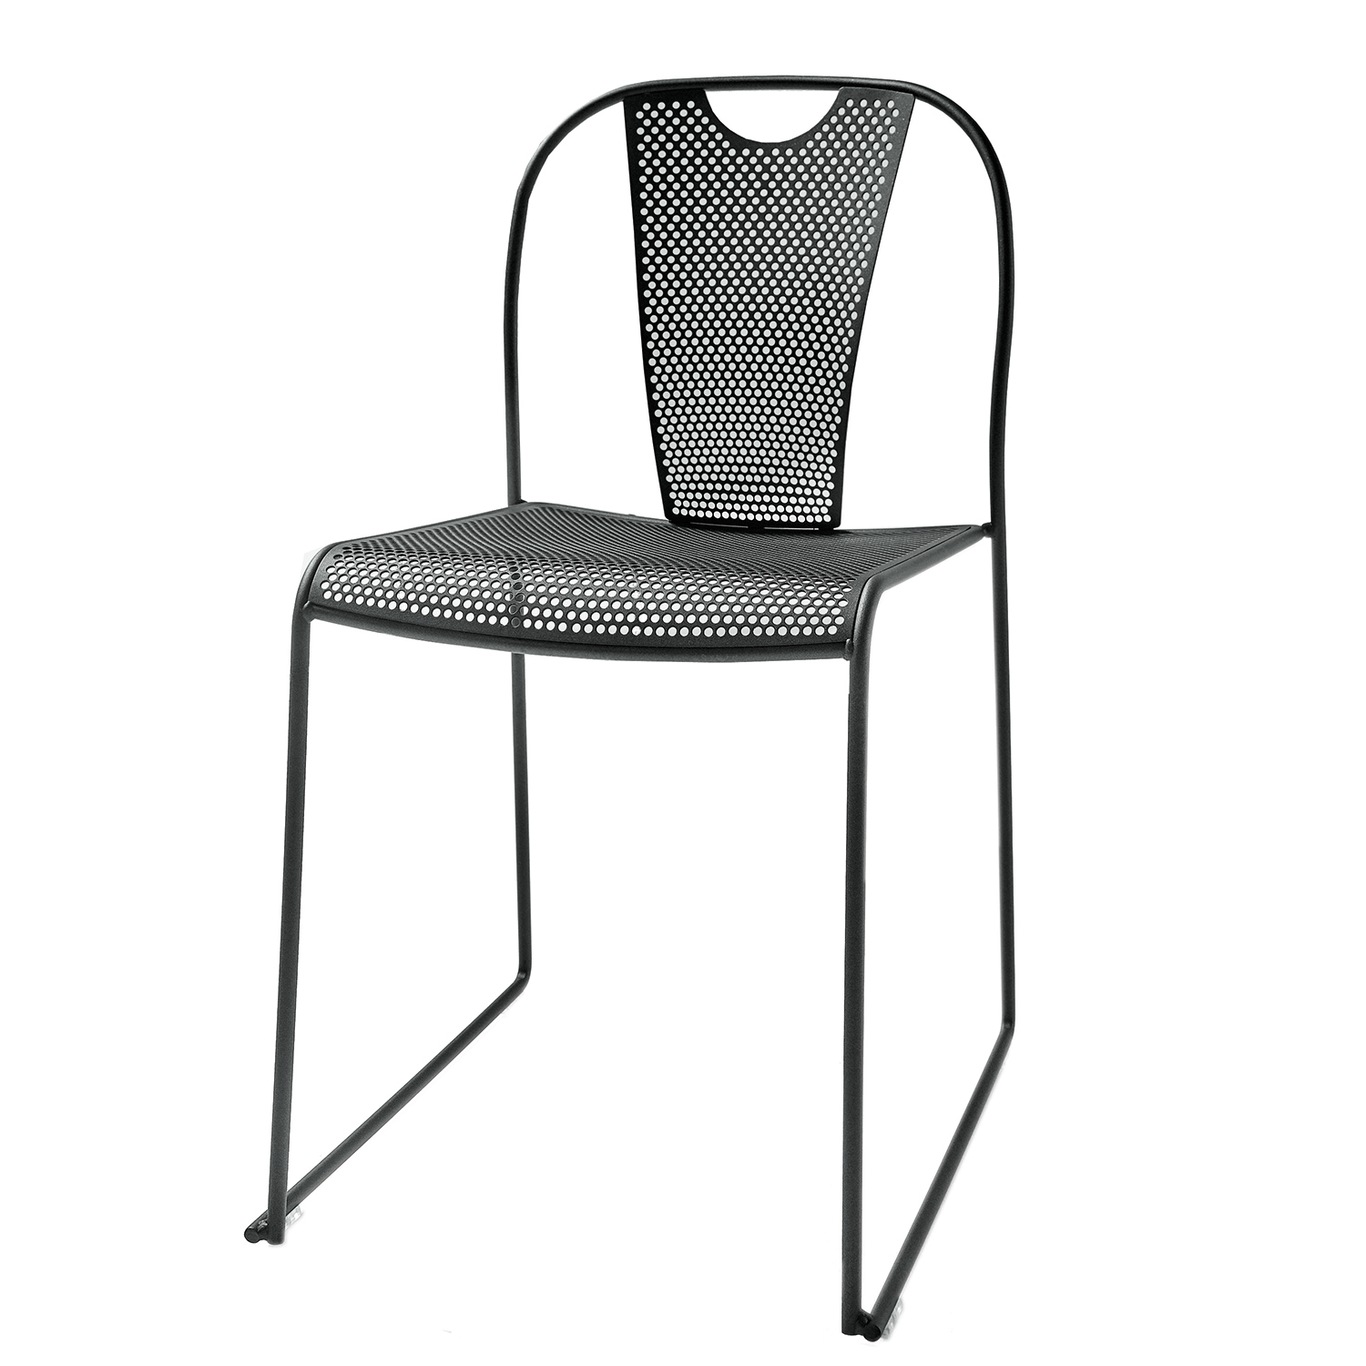 Piazza Chair, Anthracite